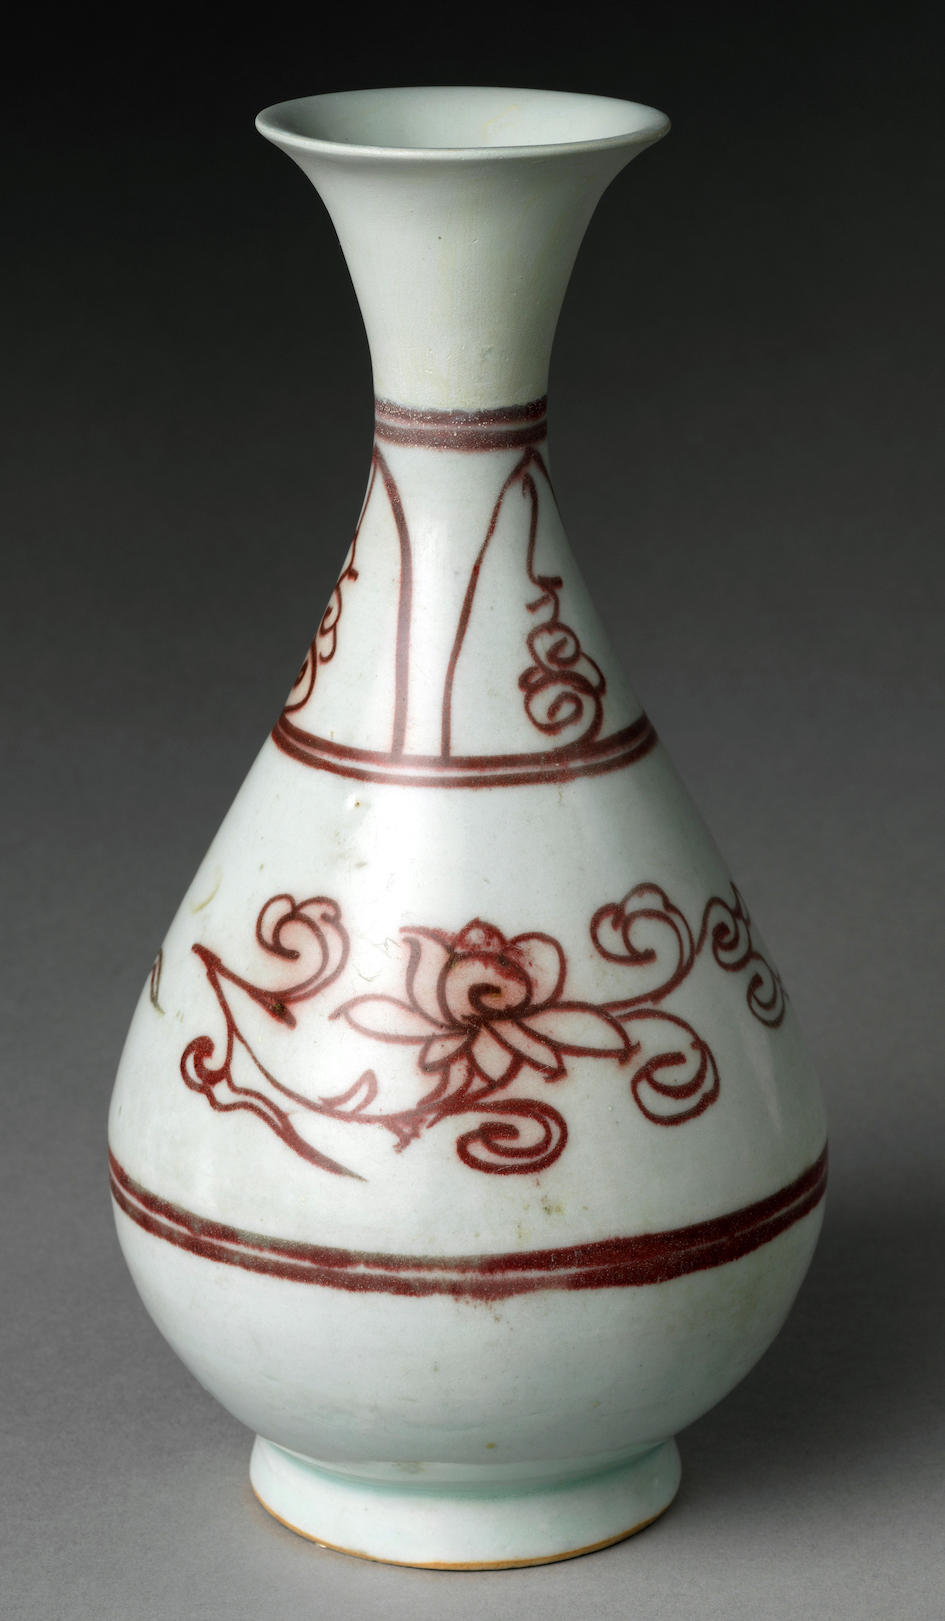 Bottle with Peonies, mid-14th century (Yuan dynasty), porcelain painted with copper red under transparent glaze (Jingdezhen ware), 24.1 x 12.4 cm (The Metropolitan Museum of Art)